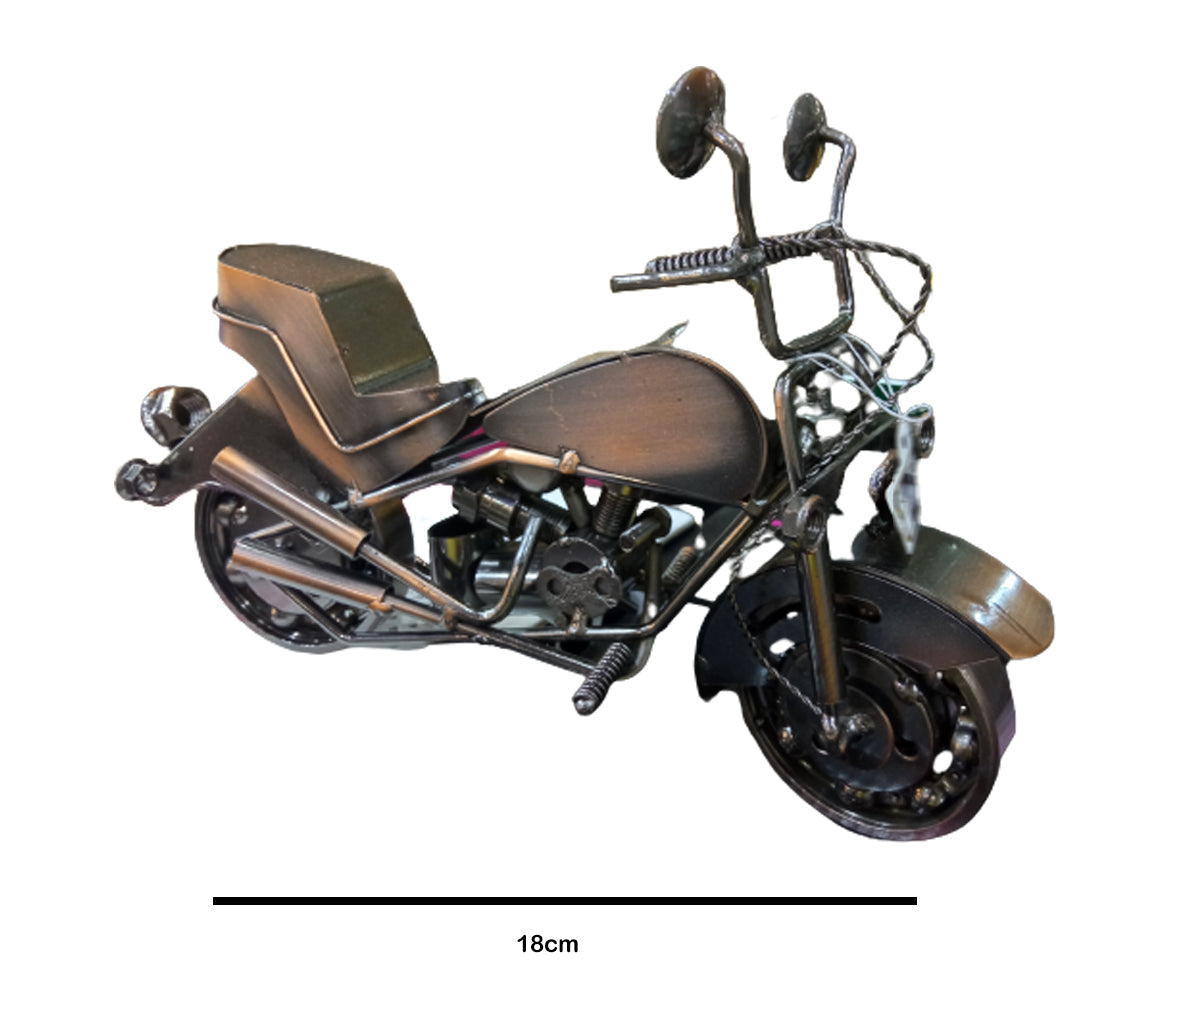 Handmade Retro Motorcycle Model Decoration - A Timeless and Versatile Piece